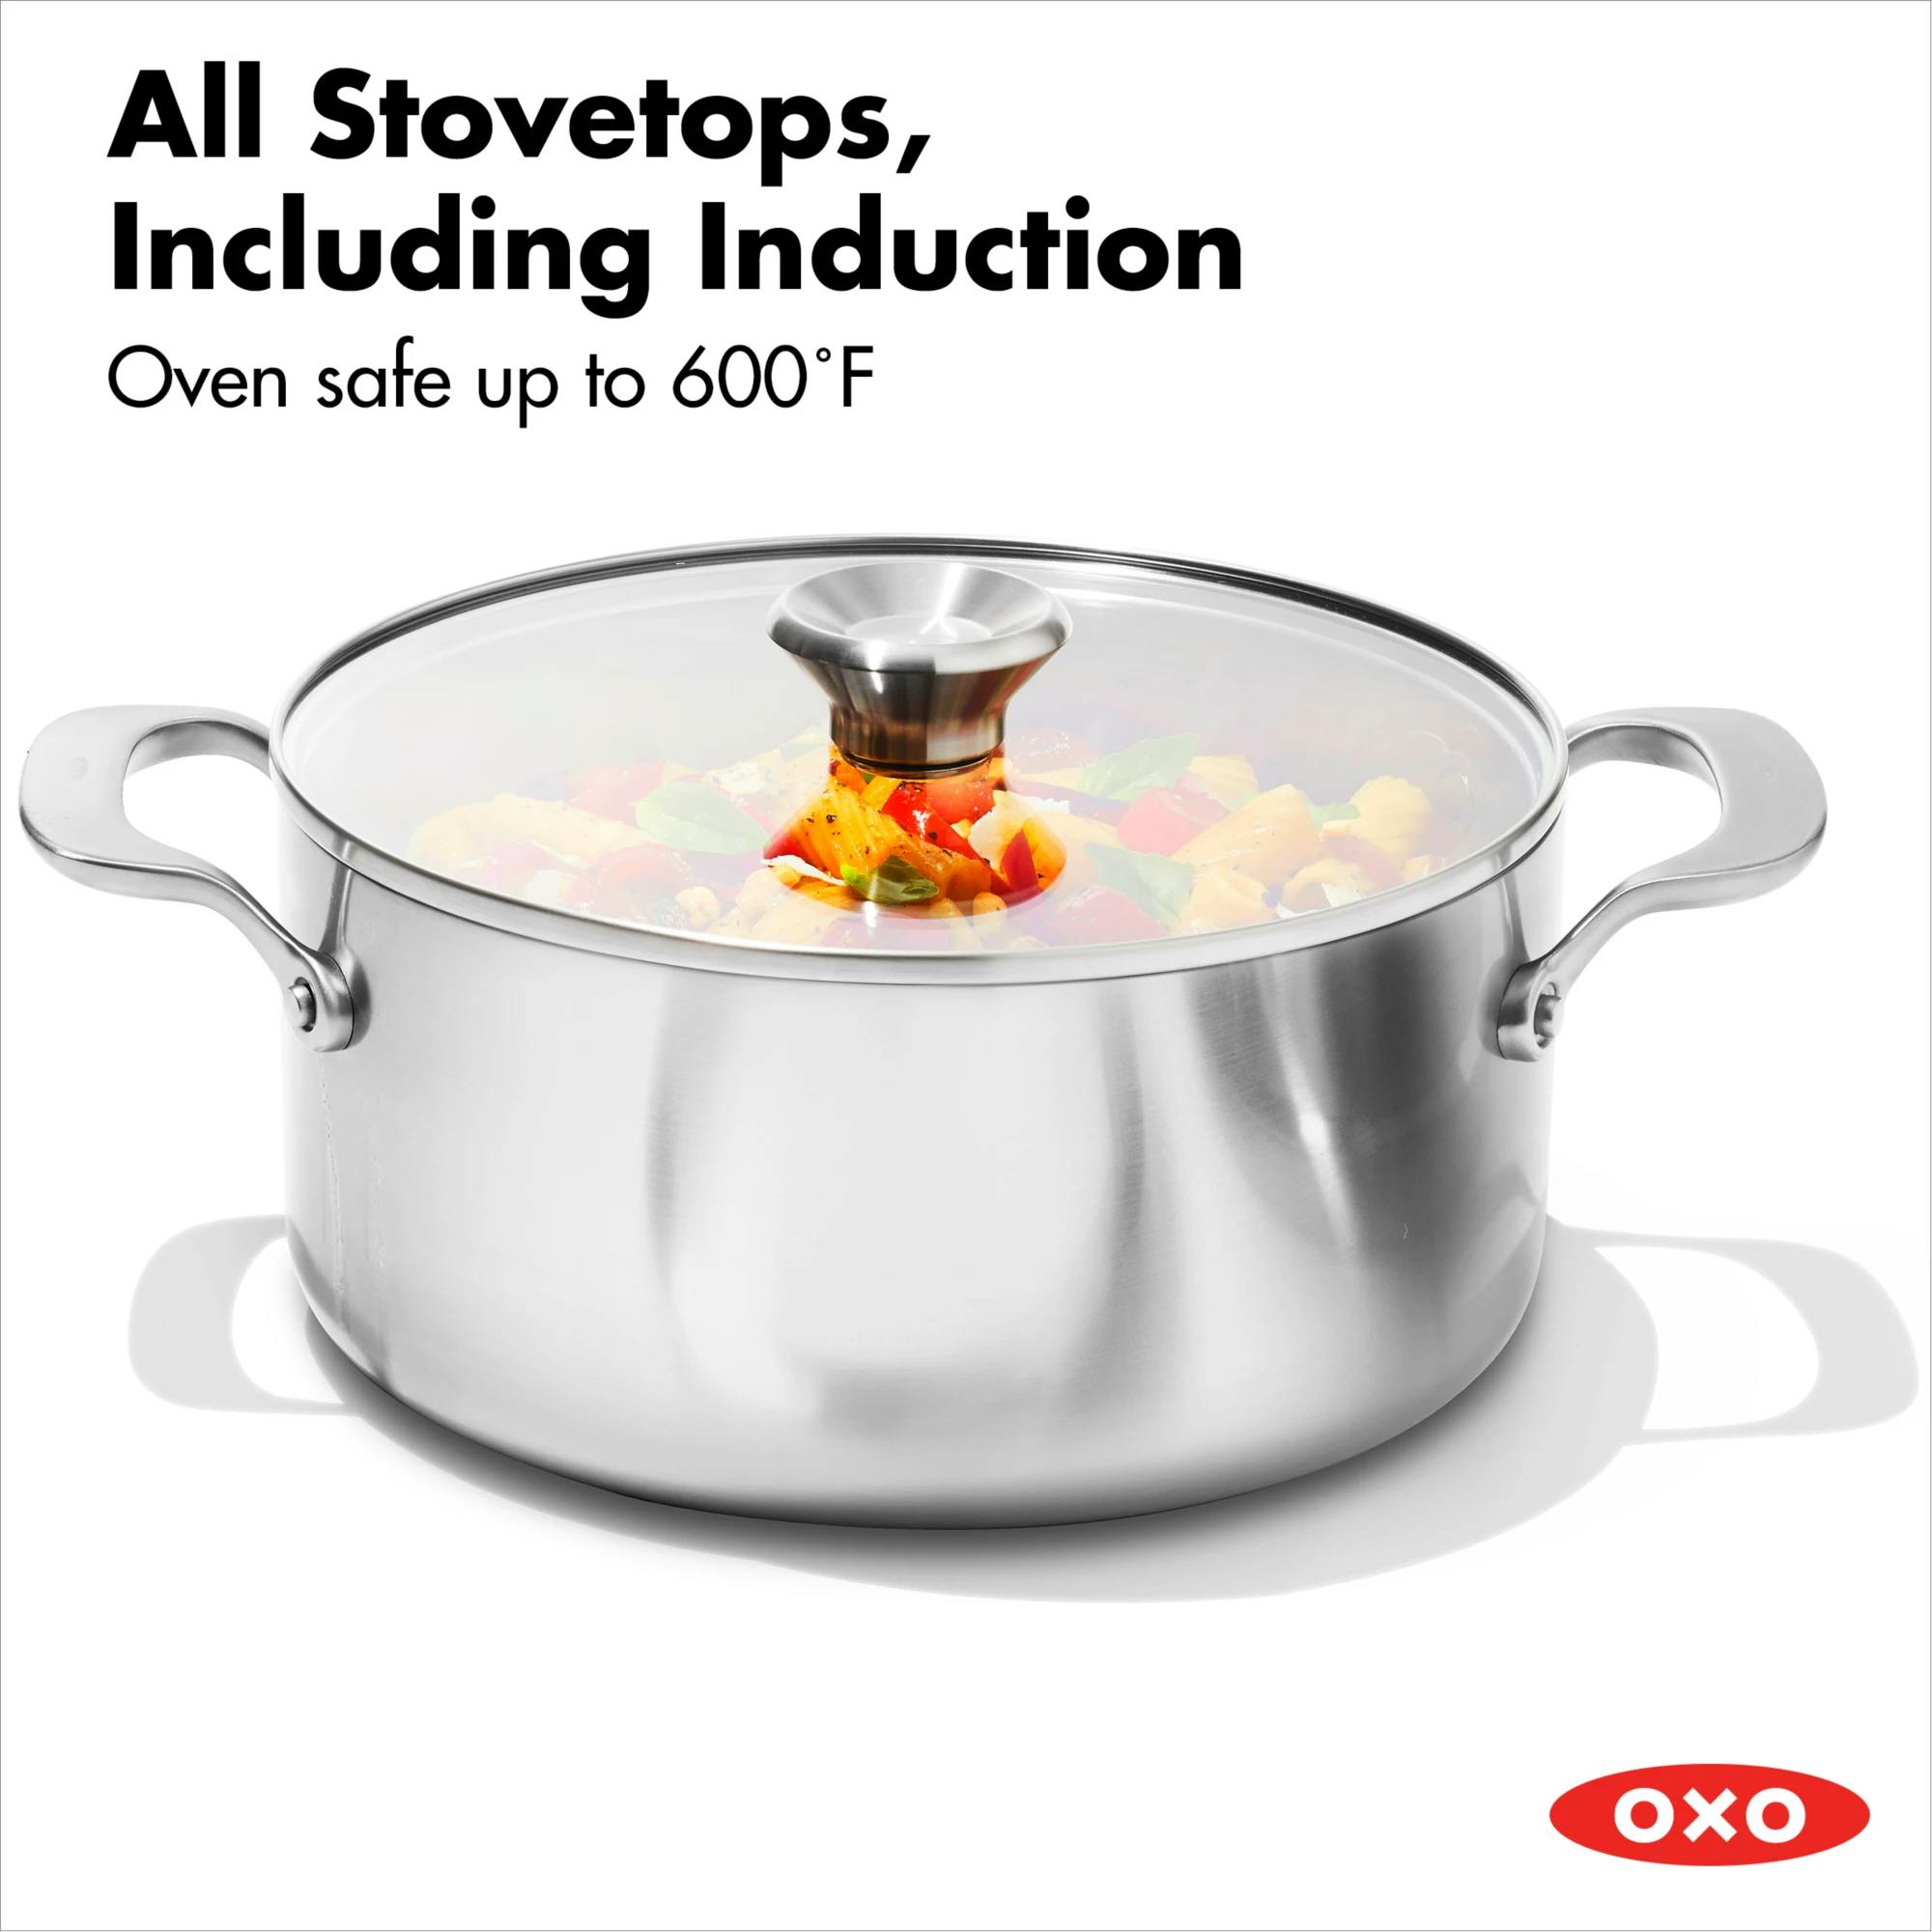 OXO Tri-Ply Stainless Non-Stick Mira Series 5.2 QT Casserole with Lid